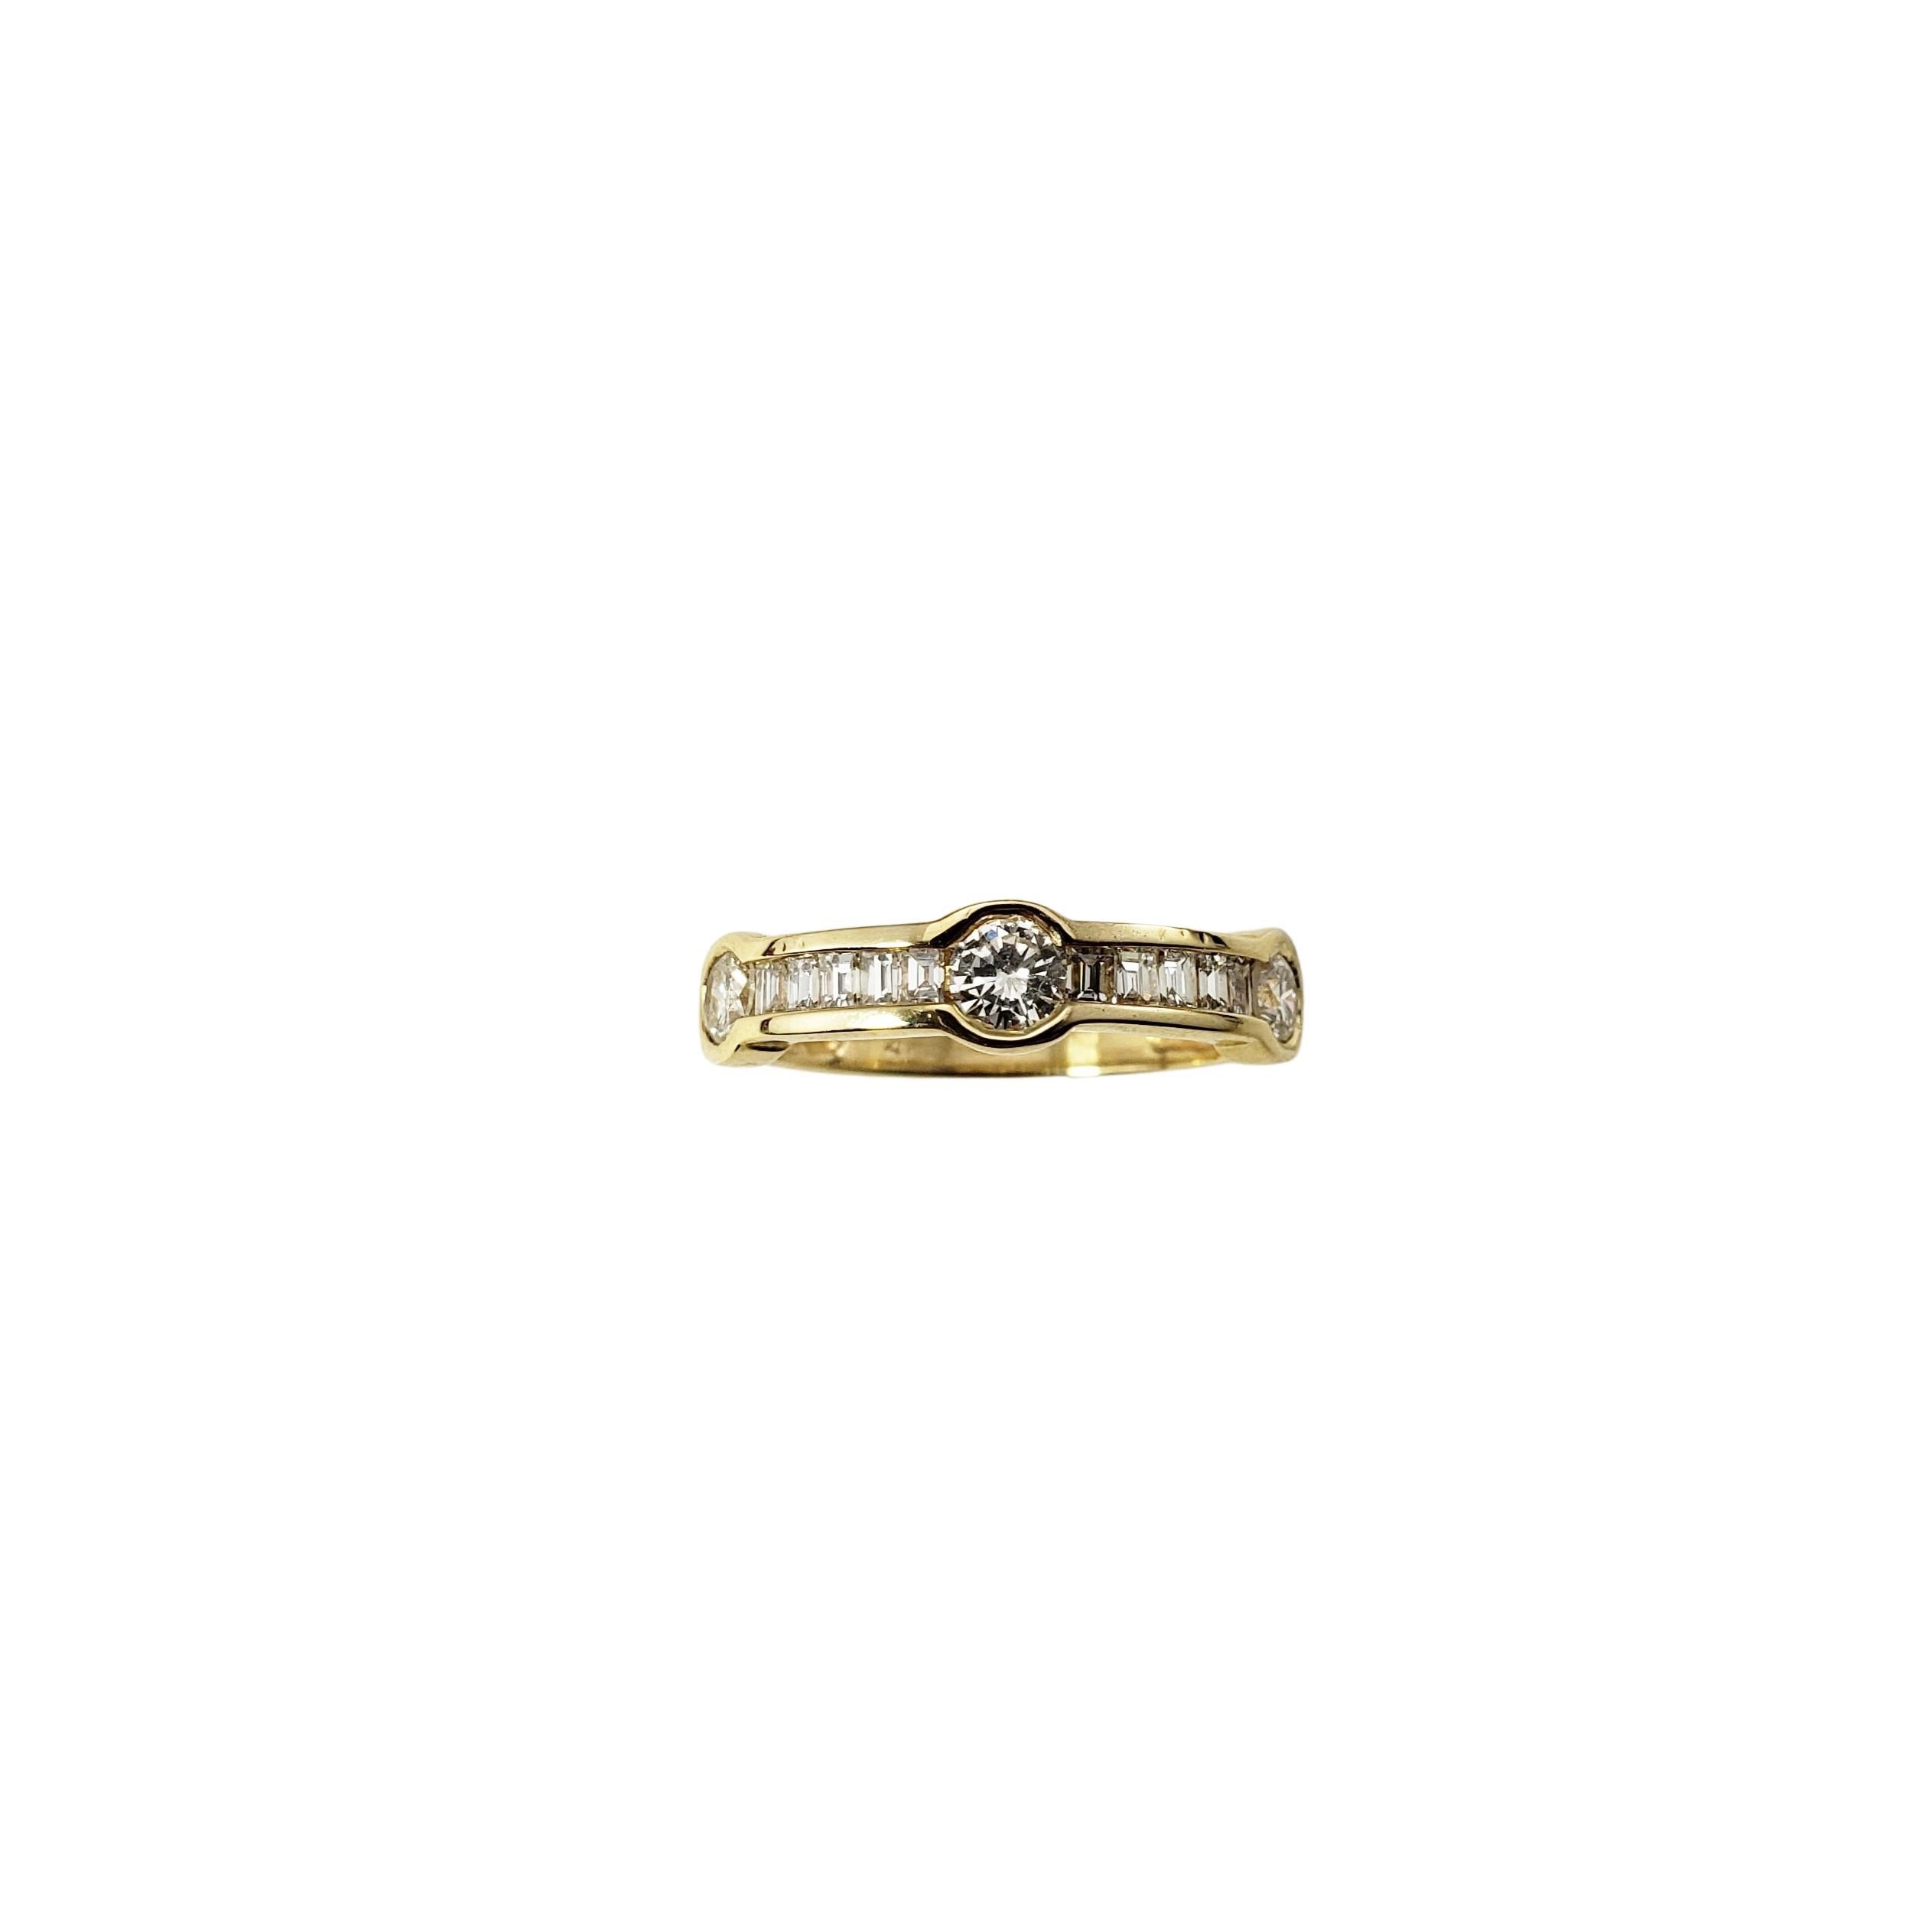 14 Karat Yellow Gold and Diamond Ring Size 6-

This sparkling ring features 10 baguette diamonds and three round brilliant cut diamonds set in beautifully detailed 14K yellow gold.
Width:  5 mm.  Shank:  2 mm.

Approximate total diamond weight:  .70